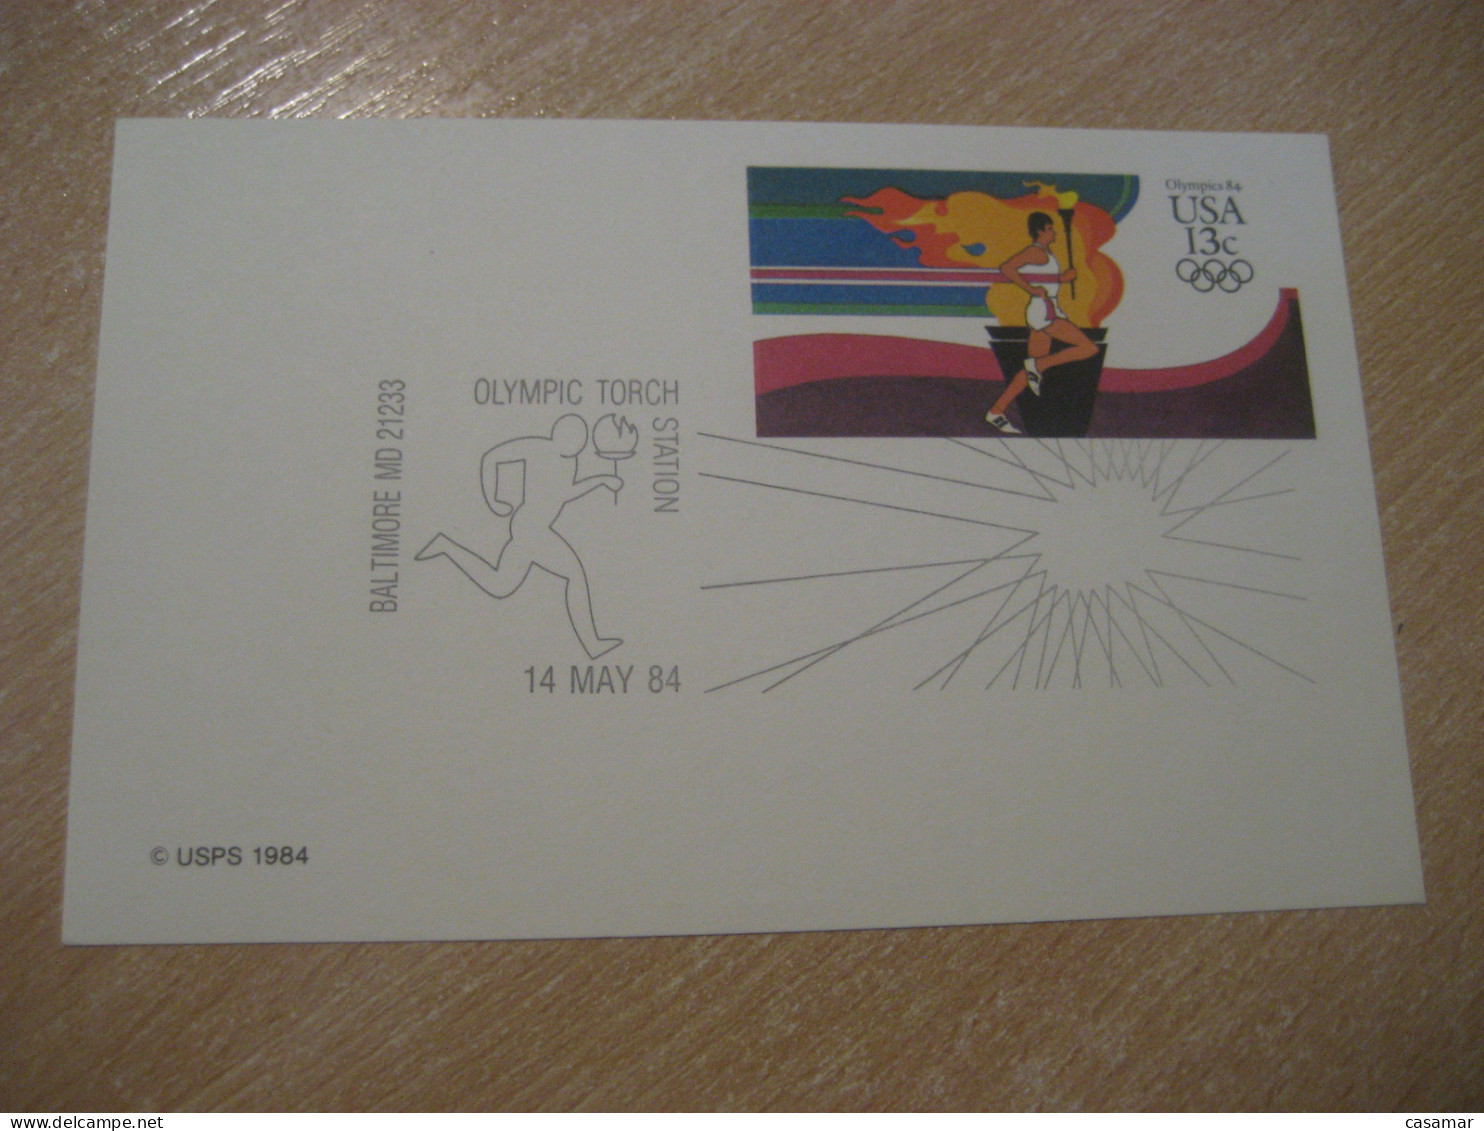 BALTIMORE 1984 Olympic Torch Los Angeles Olympic Games Olympics Cancel Postal Stationery Card USA - Sommer 1984: Los Angeles